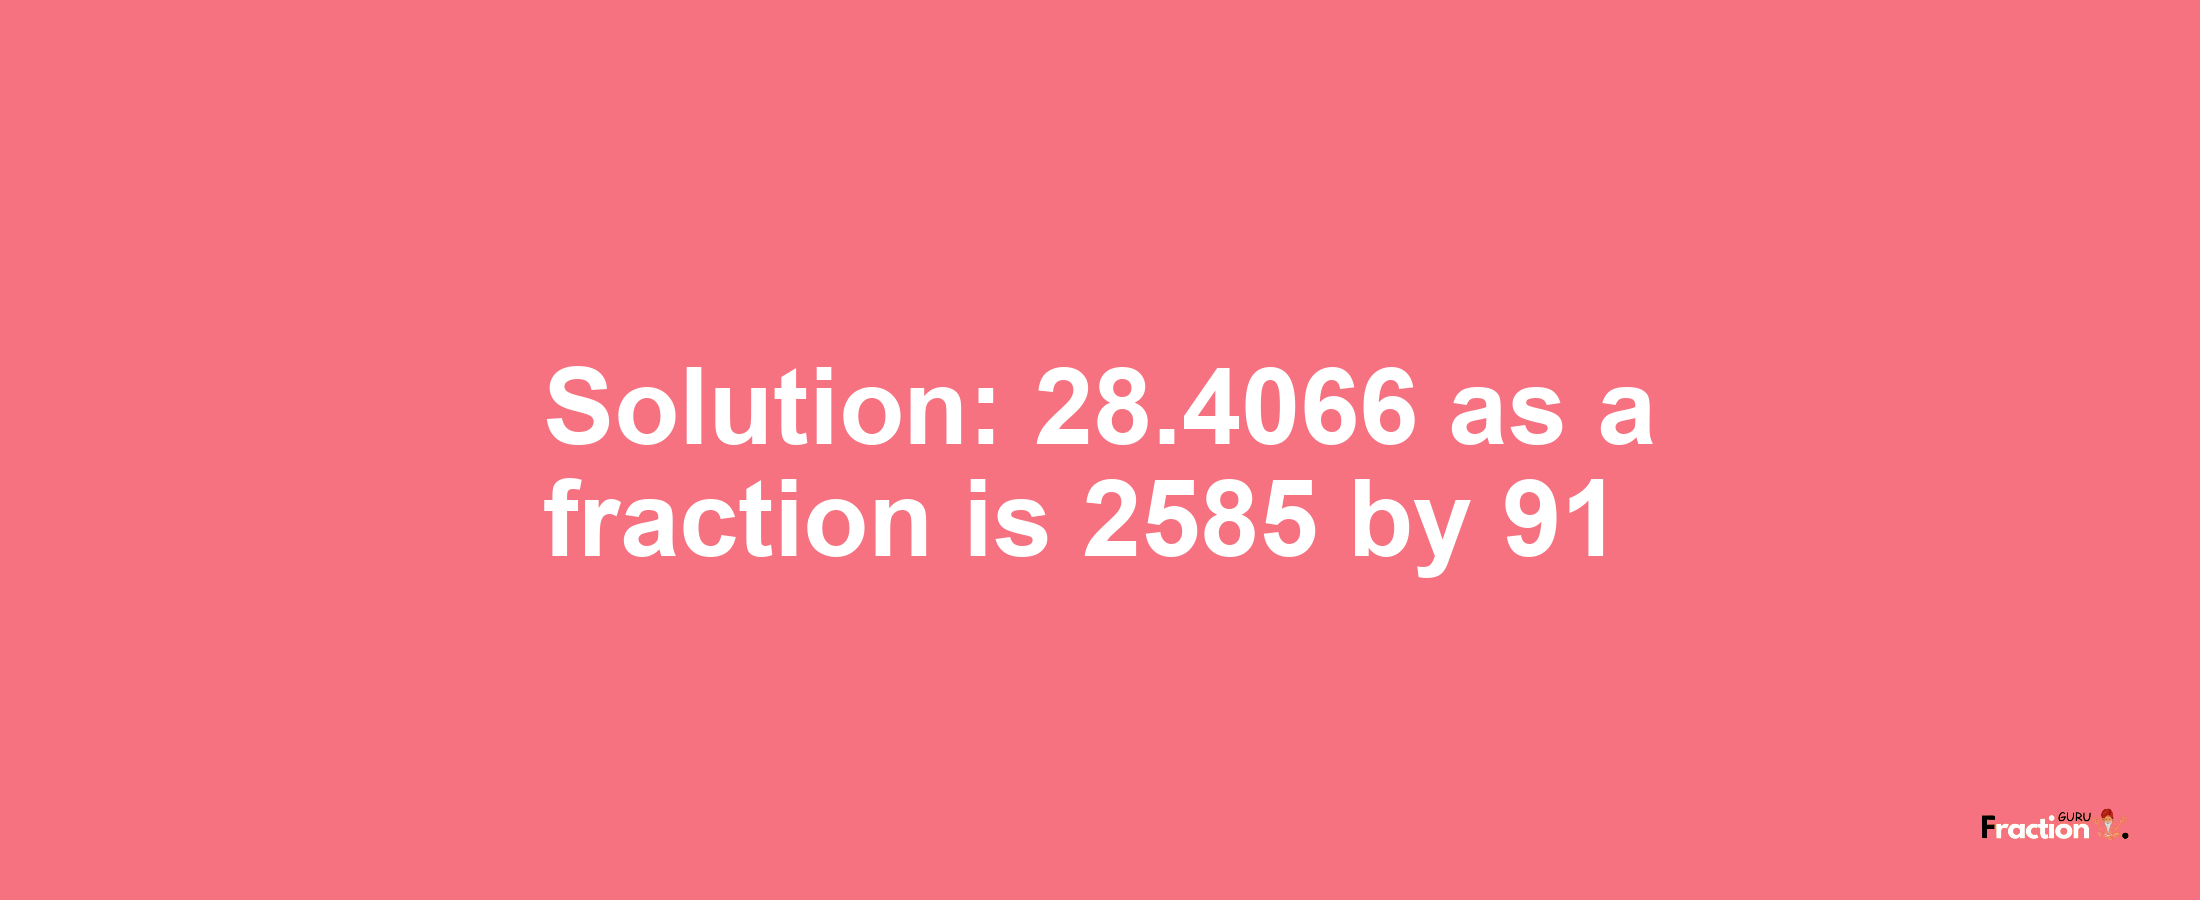 Solution:28.4066 as a fraction is 2585/91